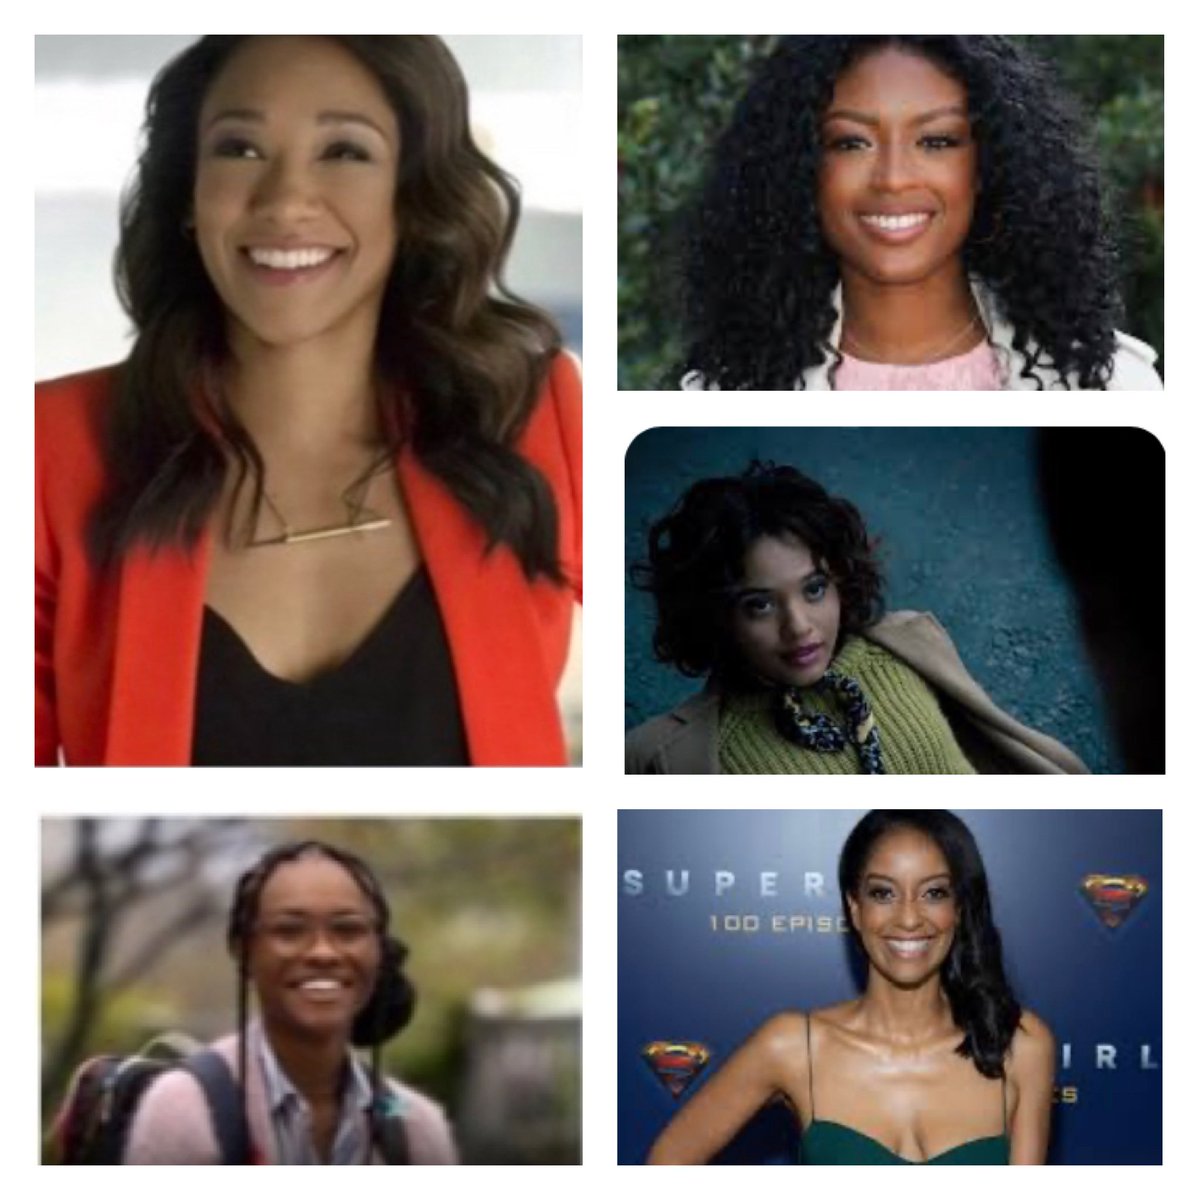 Candice face being on our tv screen as our #Iriswestallen paved the way for @JaviciaLeslie @AzieTesfai 
@MameAnnaDiop 
#KierseyClemons @kaciwalfall &so many more blk beauty Queens to be leading lady's of their own tv shows.She is the blue print that started all #9yearsofcandice❤️